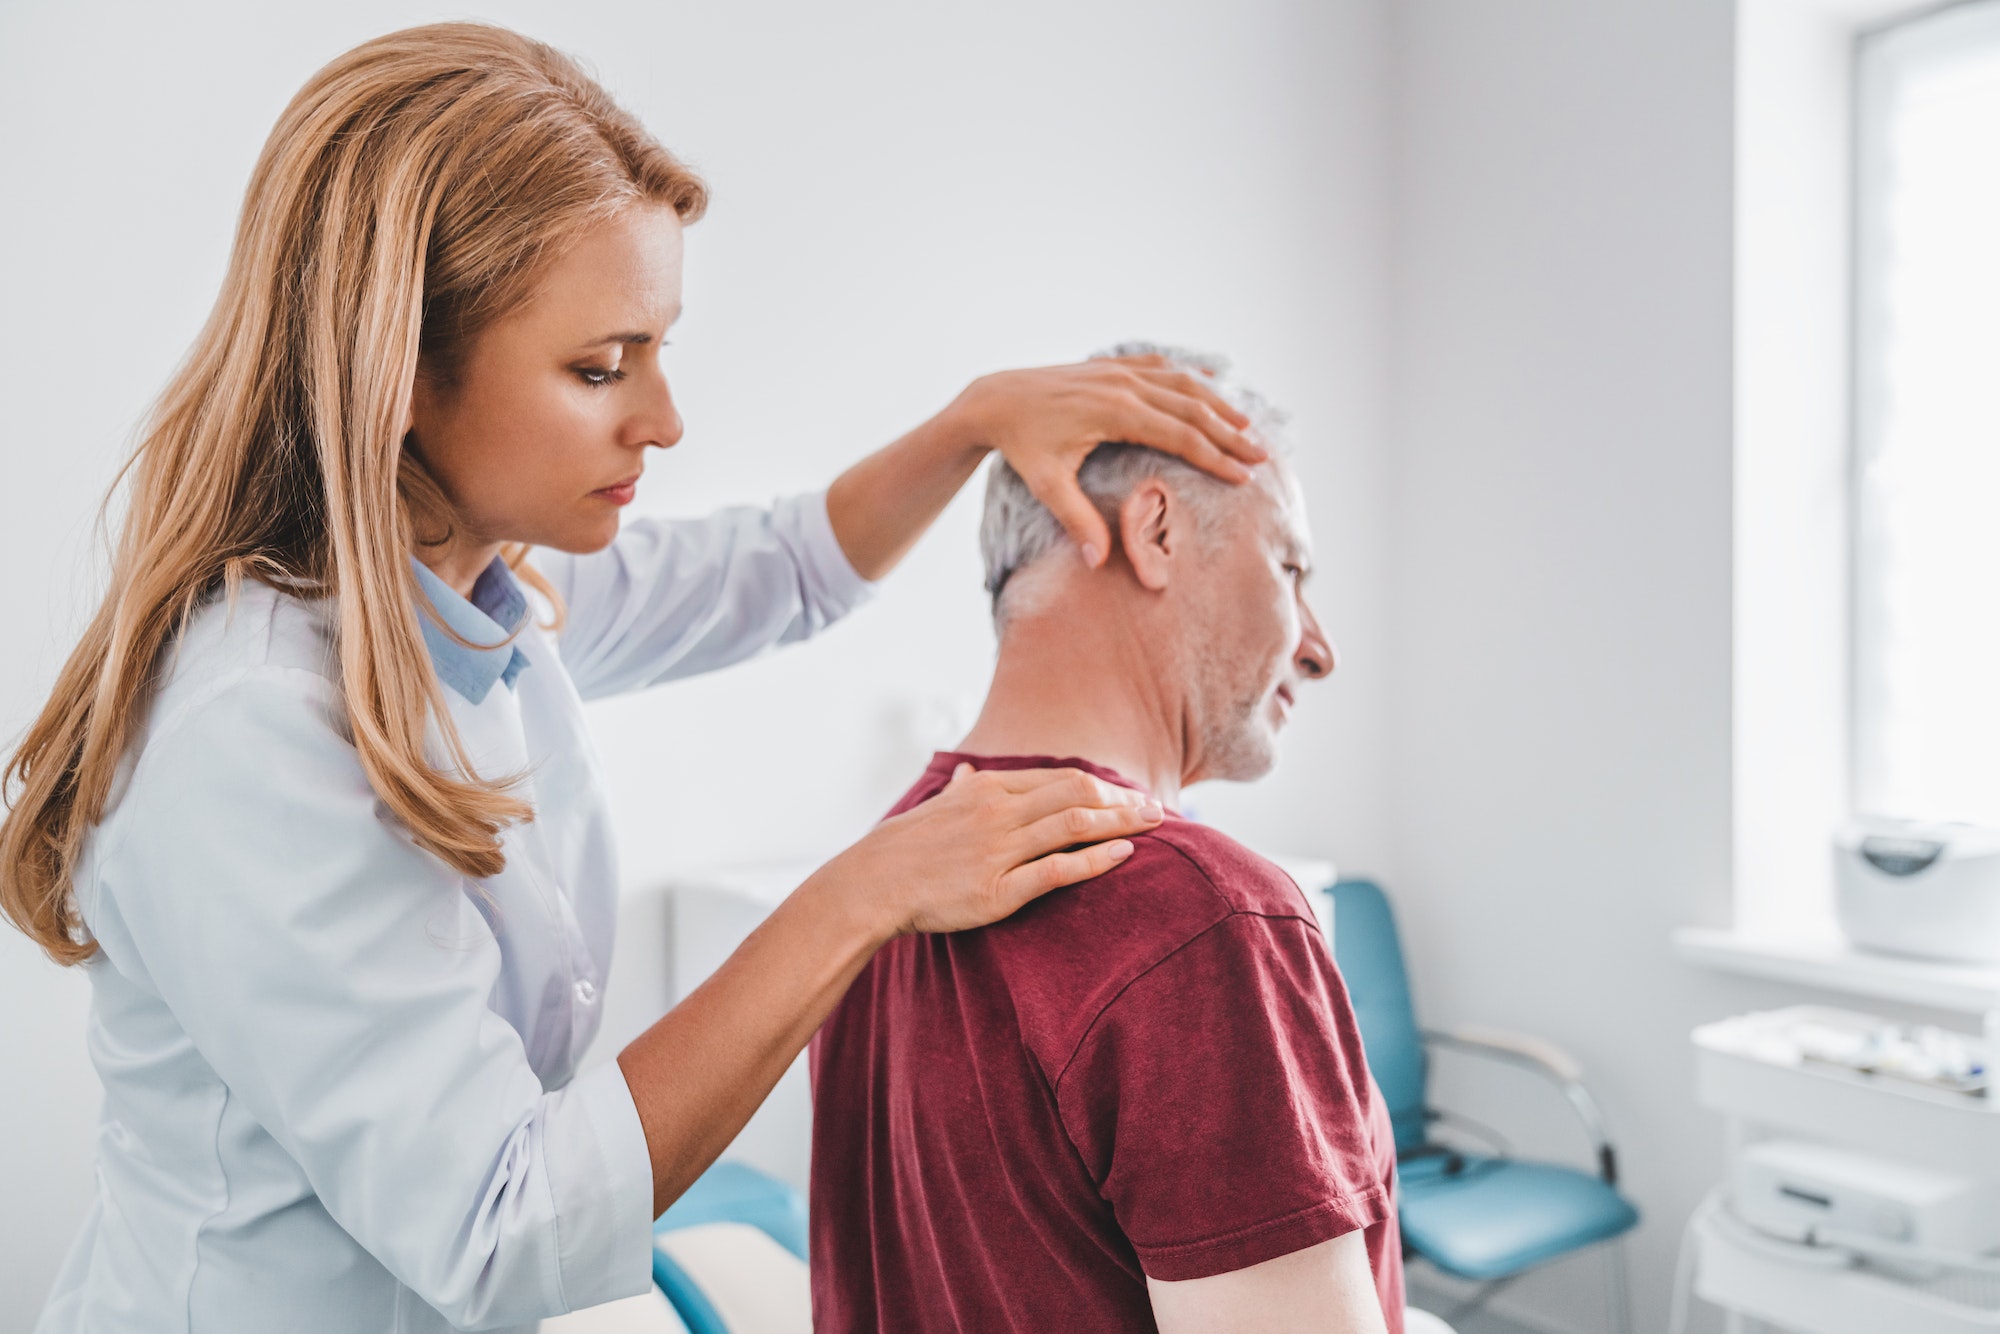 Female orthopedist examining patient's neck in hospital for headache or migraine